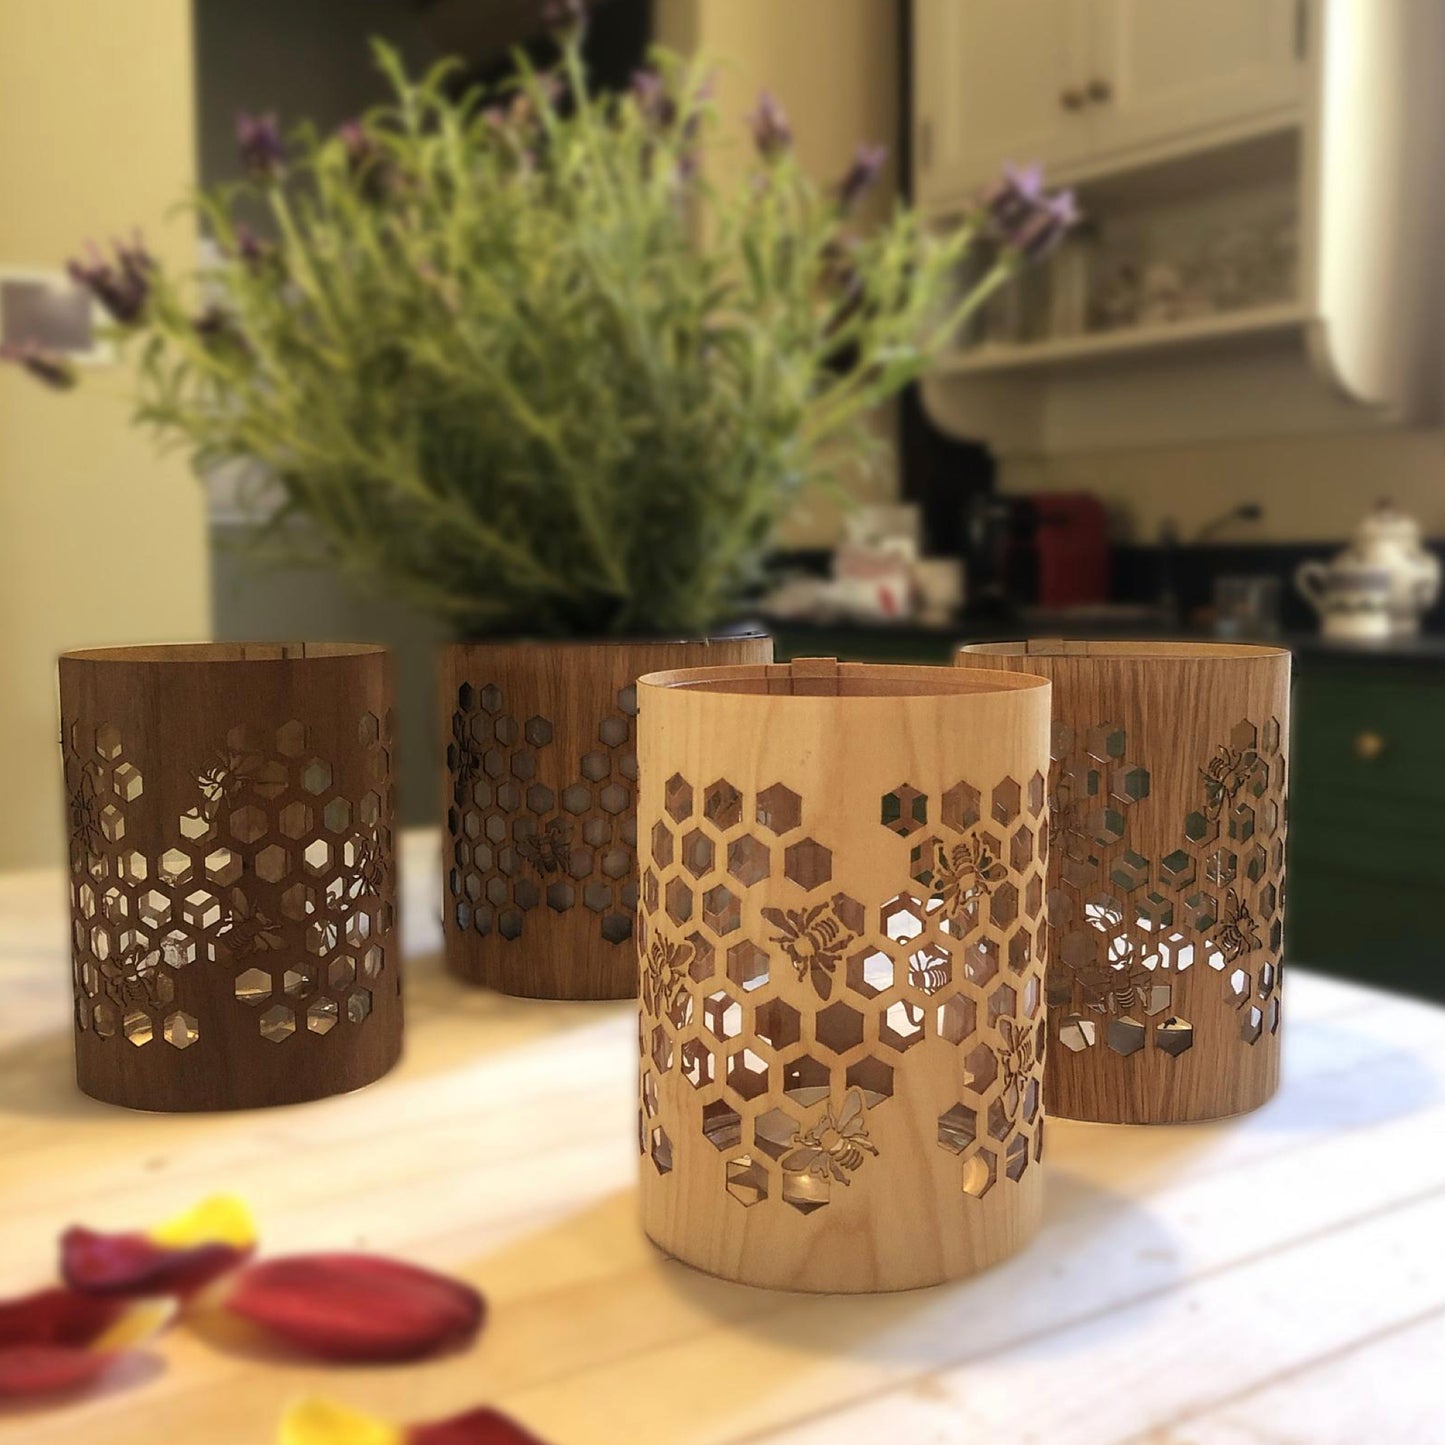 three honeybee lanterns in maple walnut ant oak on kitchen counter with lavender at the rear out of focus